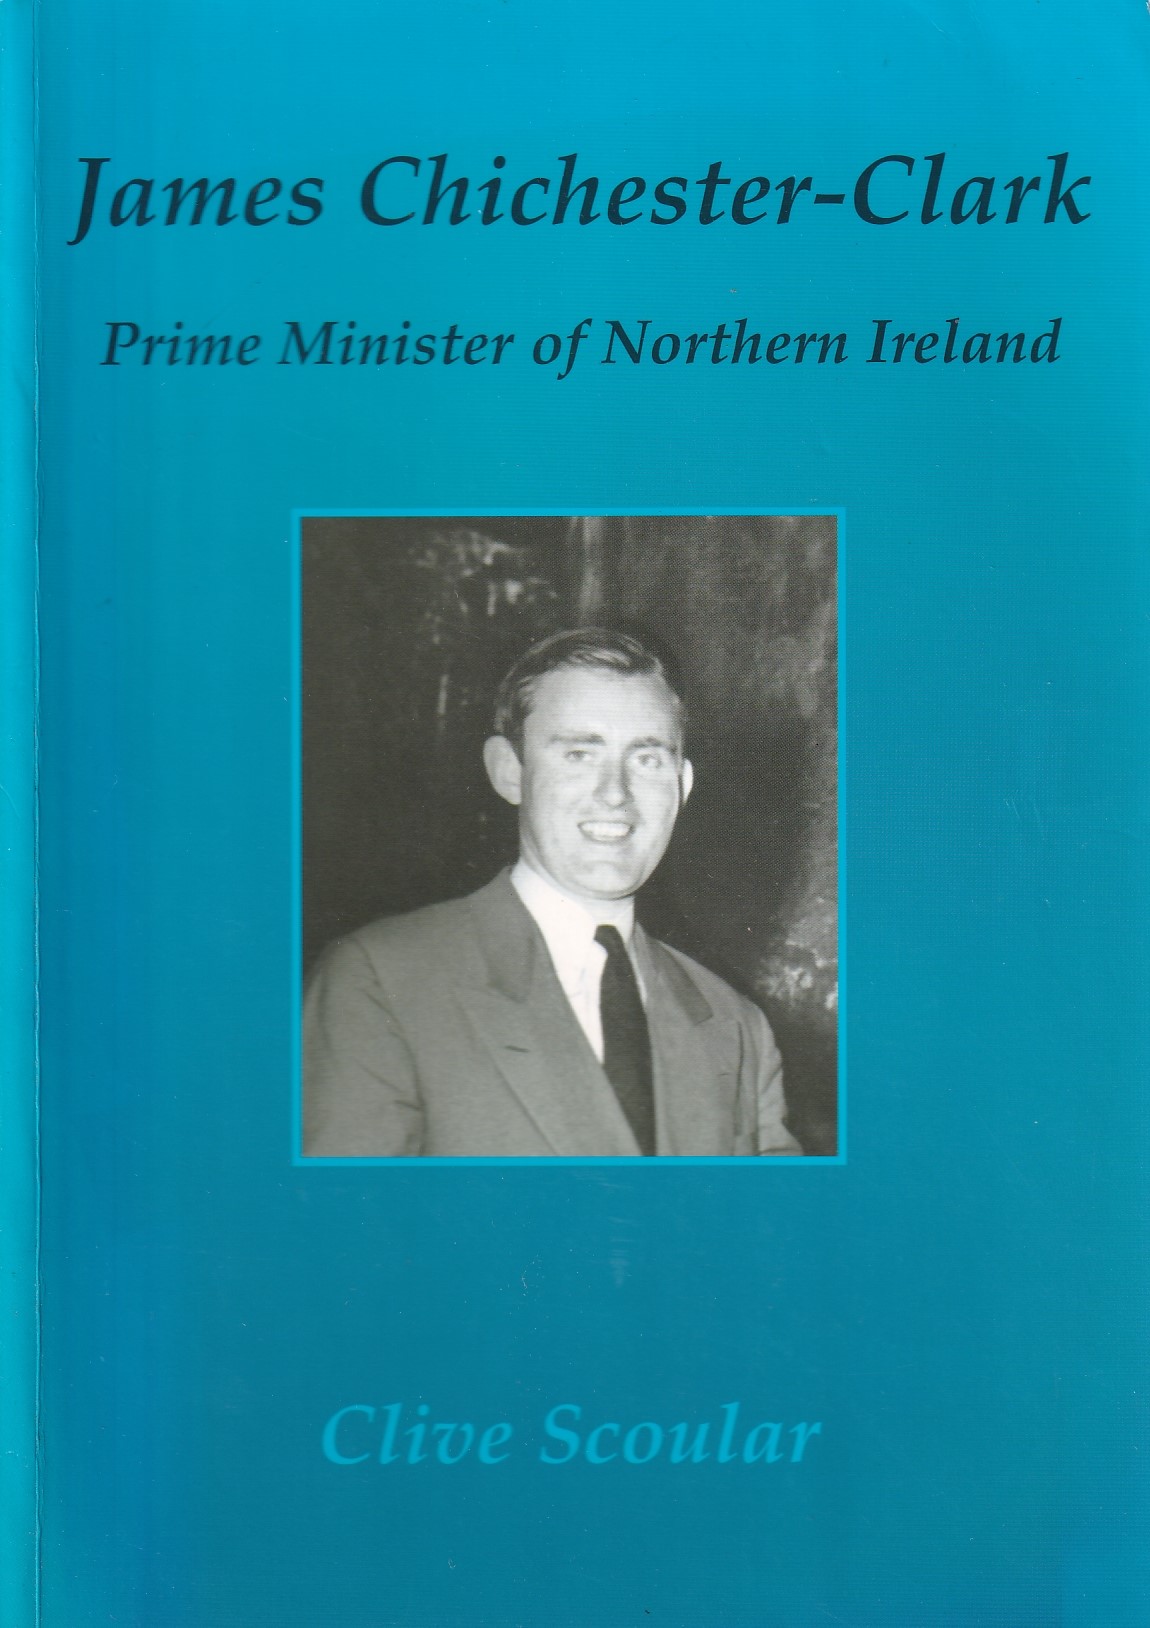 James Chichester-Clark: Prime Minister of Northern Ireland | Clive Scoular | Charlie Byrne's